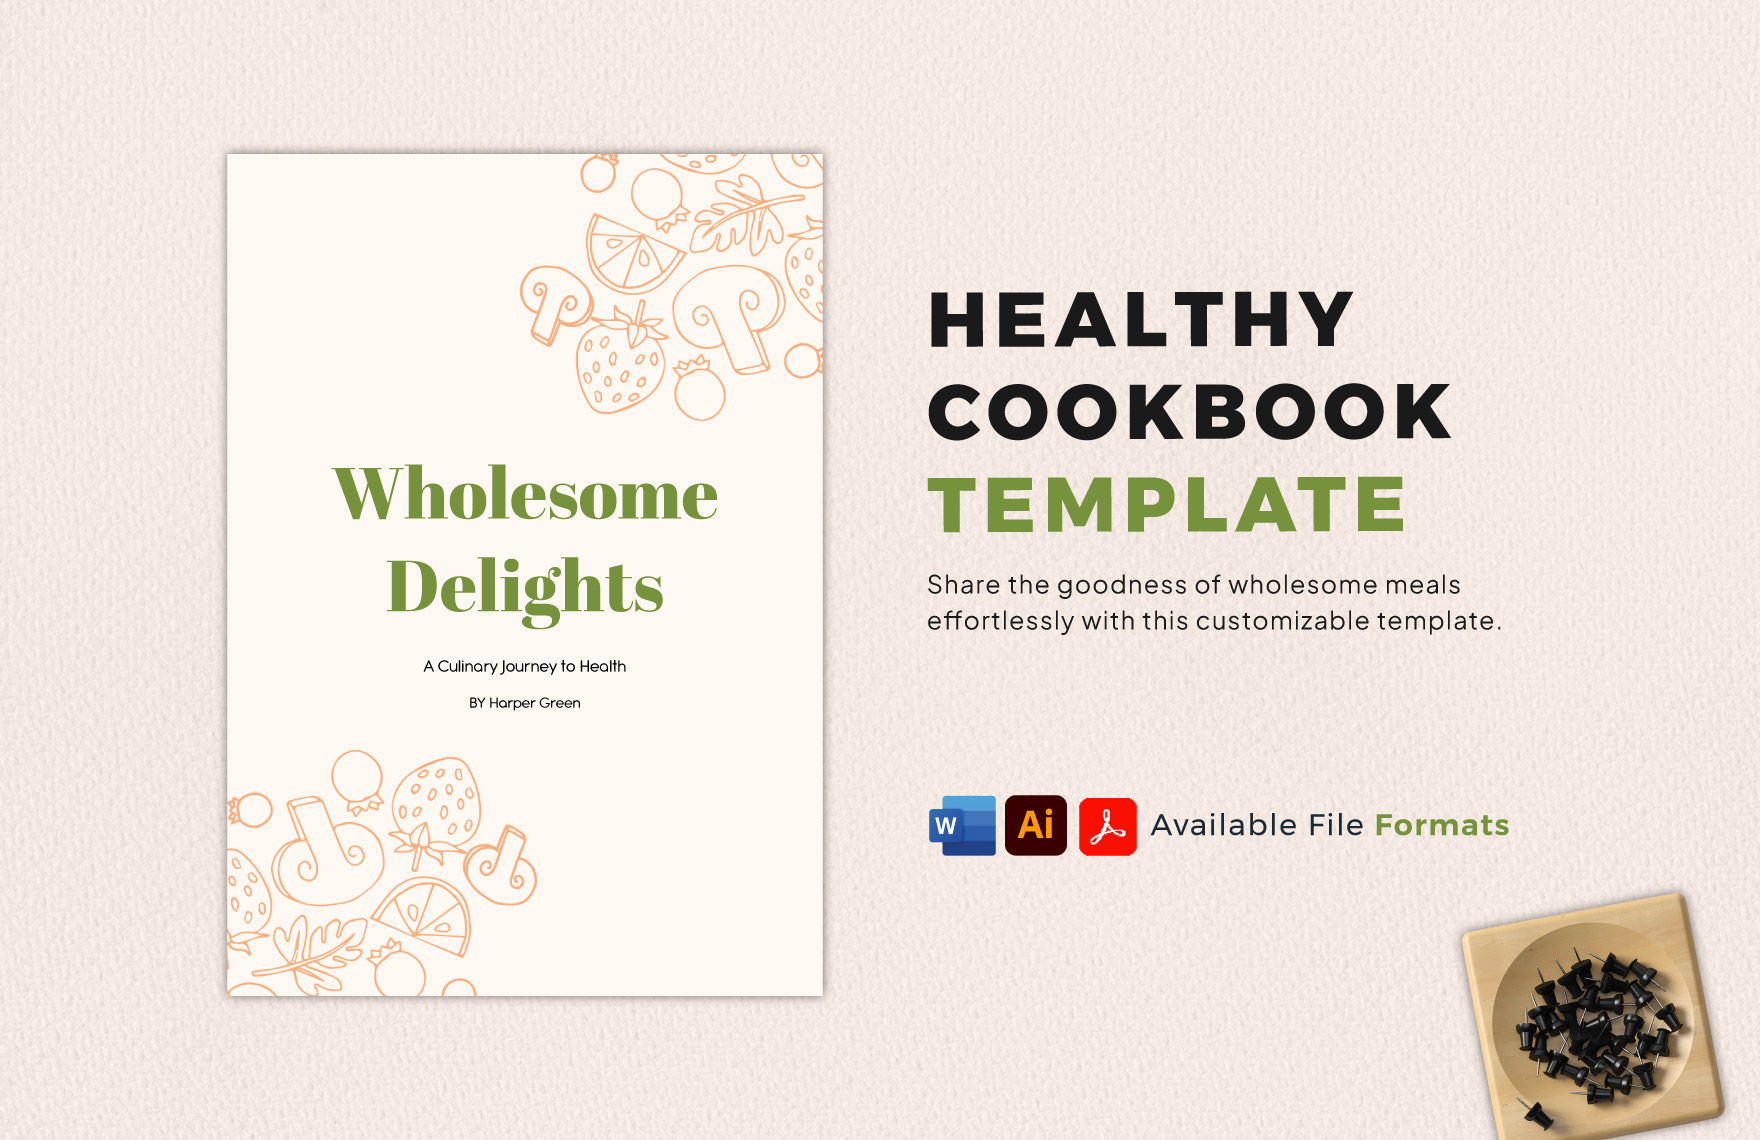 Create Your Own DIY Cookbook - Countryside